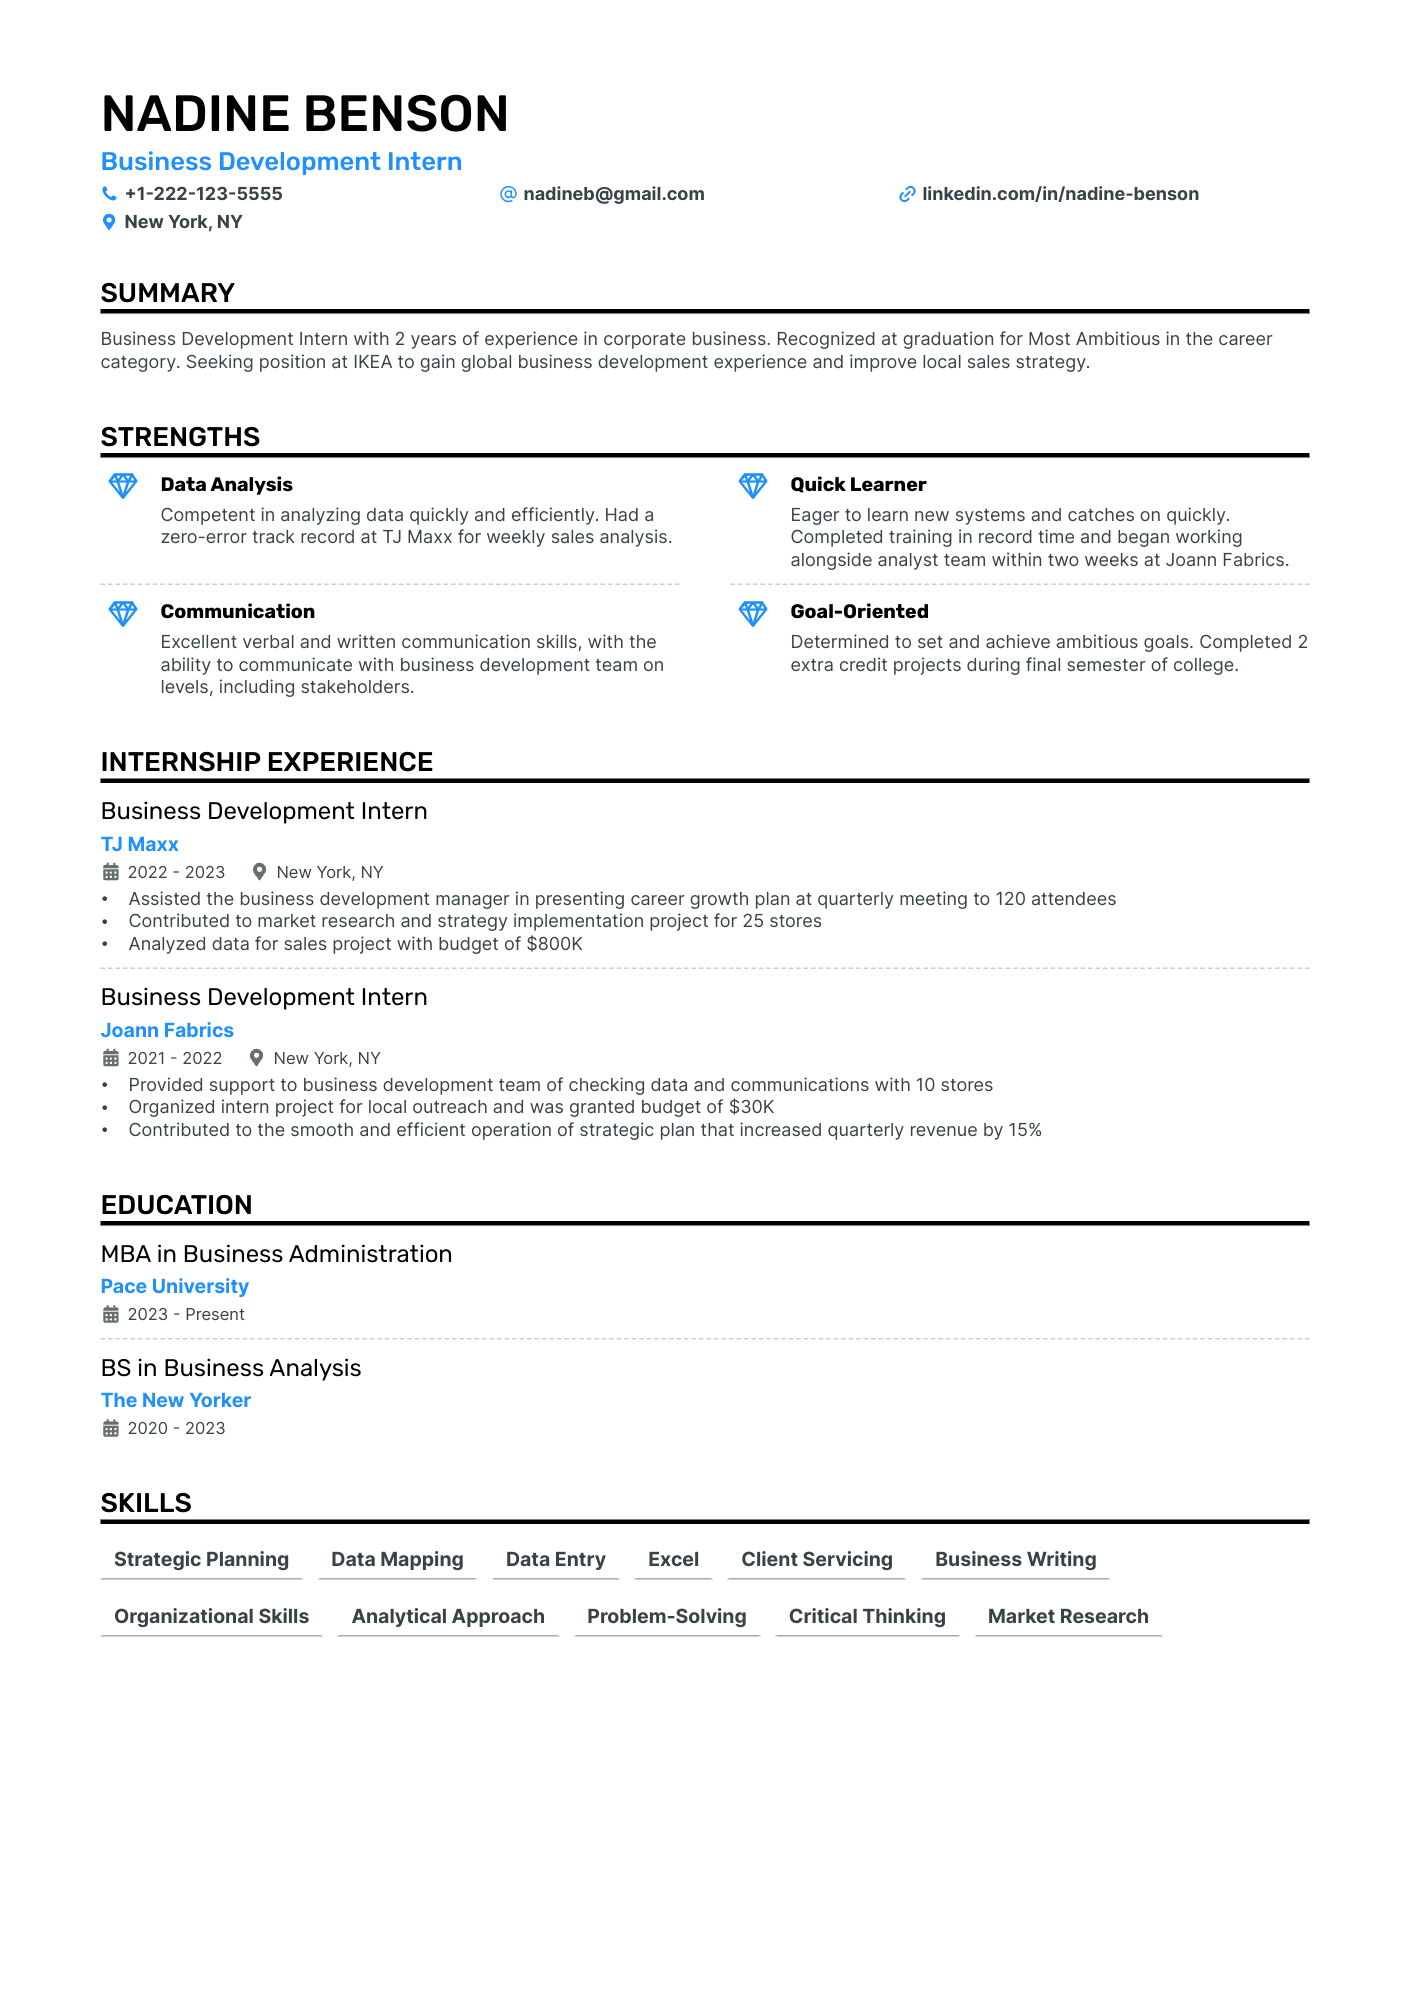 resume format for experienced business development executive